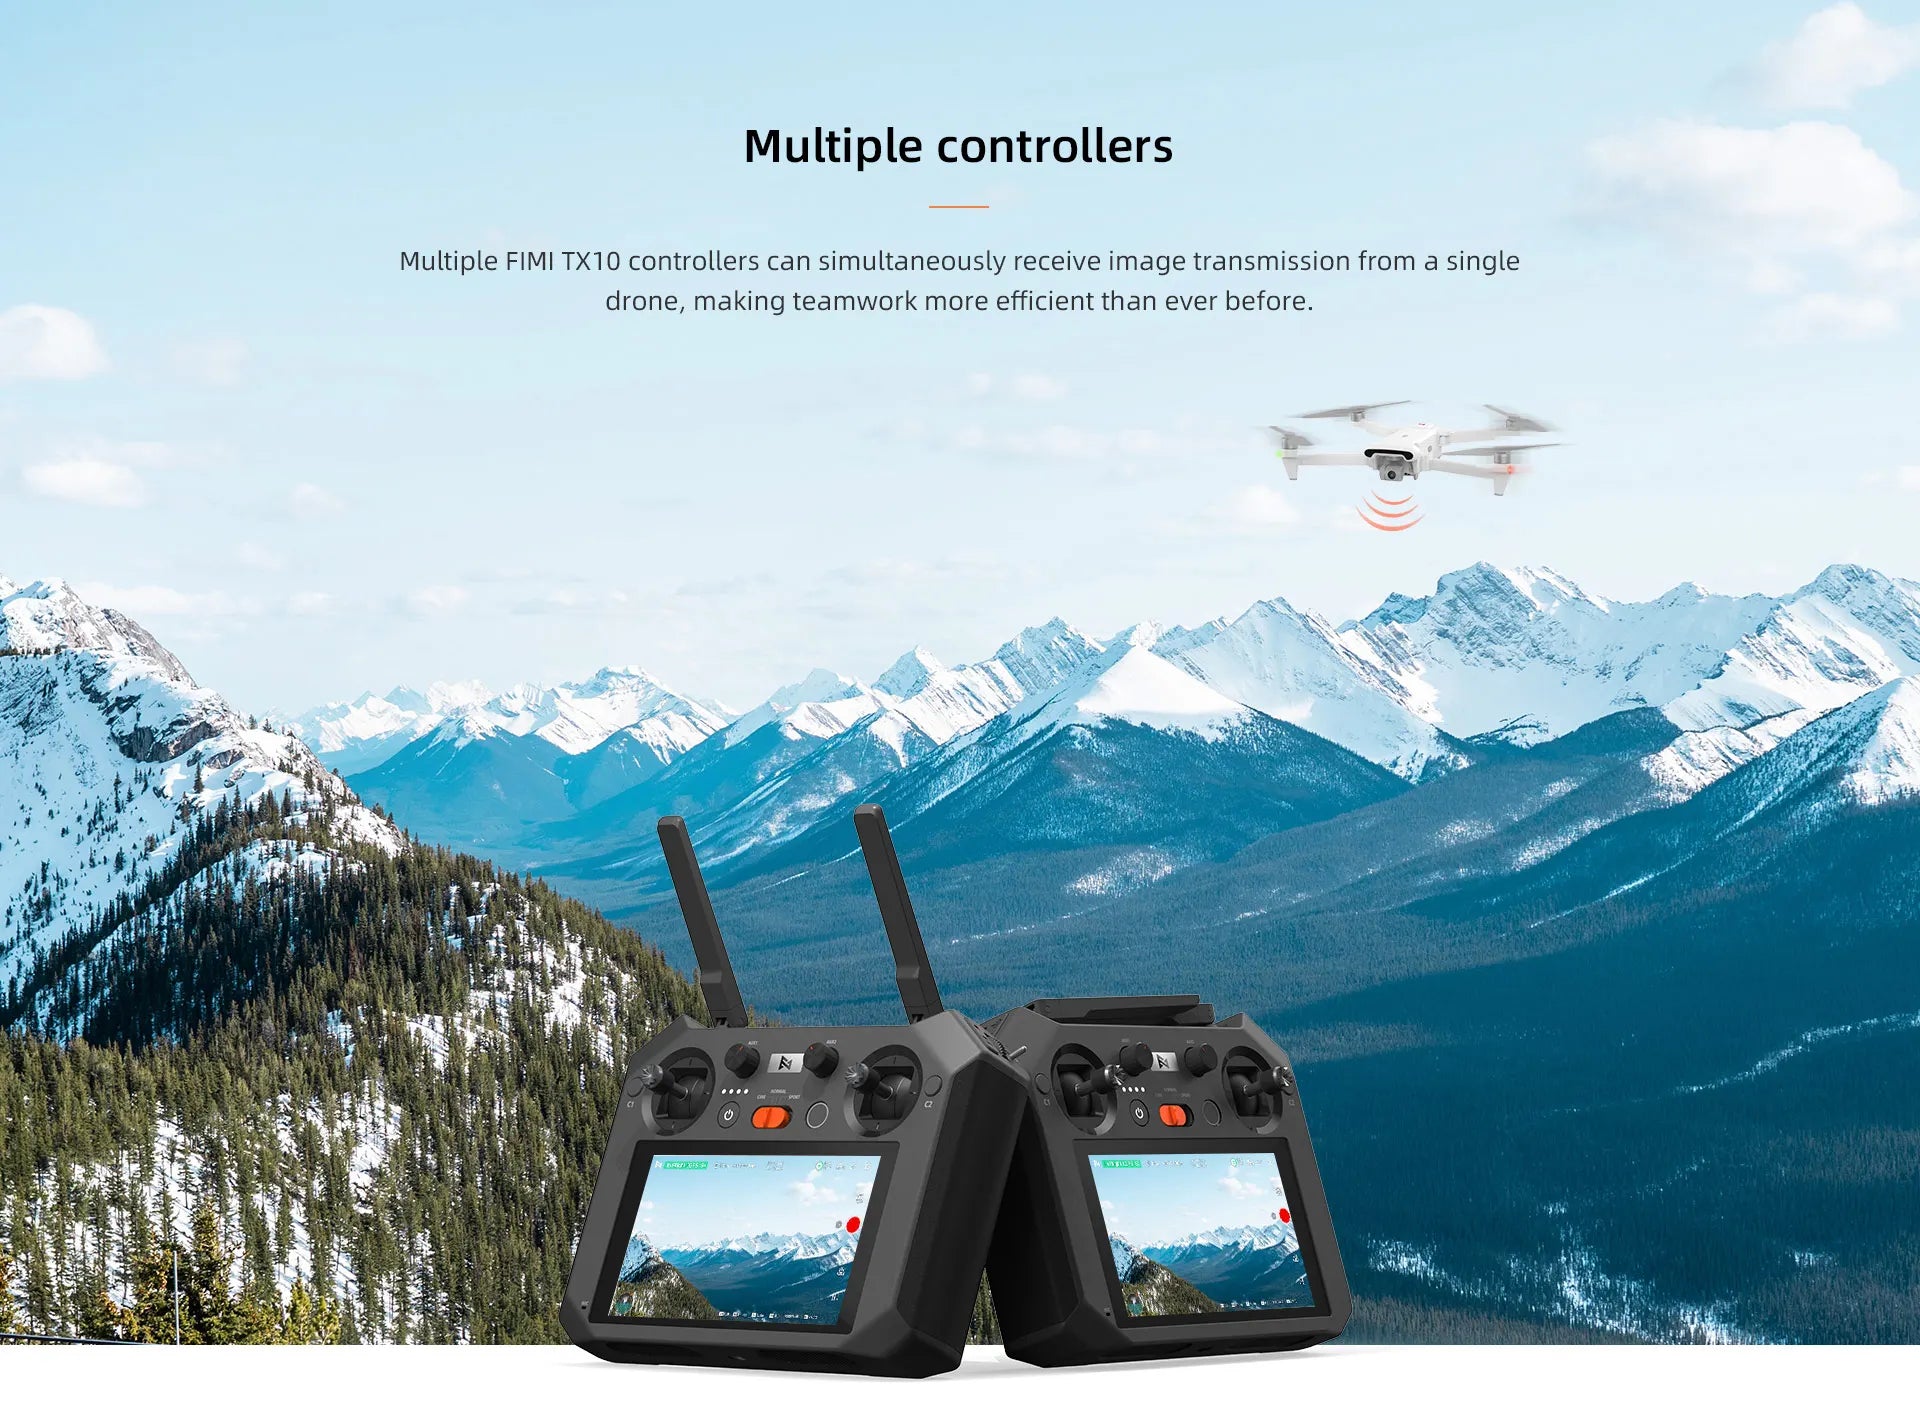 FIMI TX10 Remote Controller, multiple controllers can simultaneously receive image transmission from a single drone . teamwork more efficient